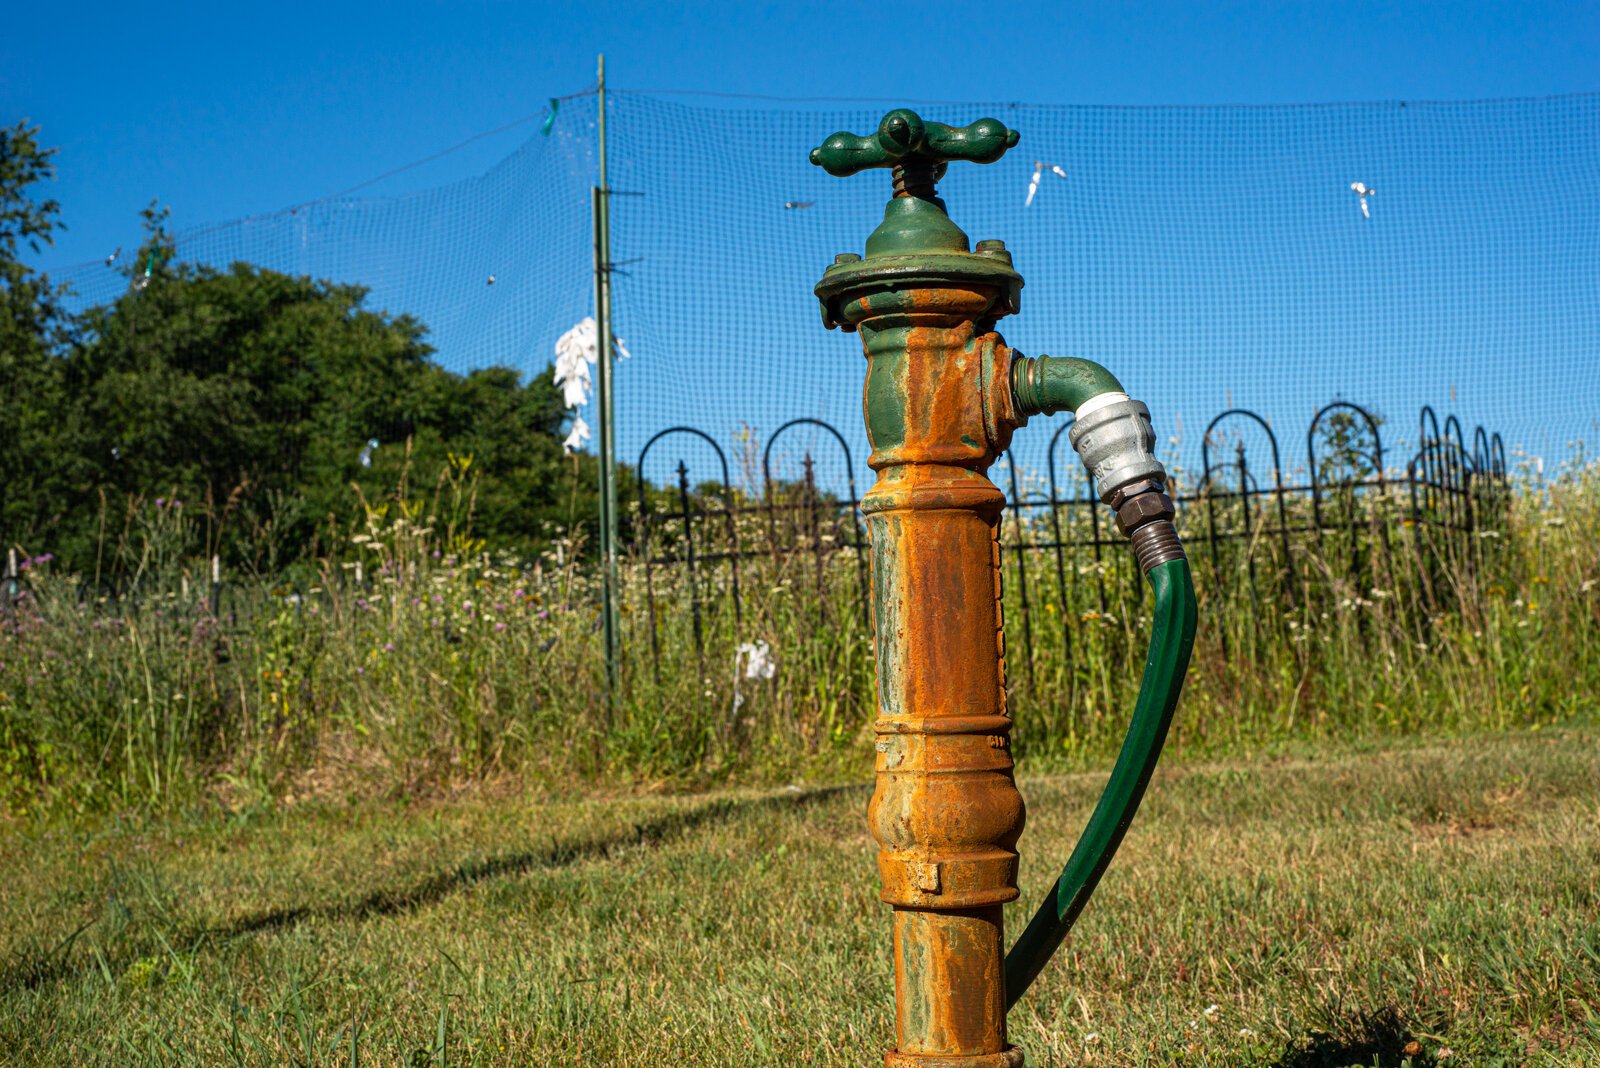 A water spigot on the property.